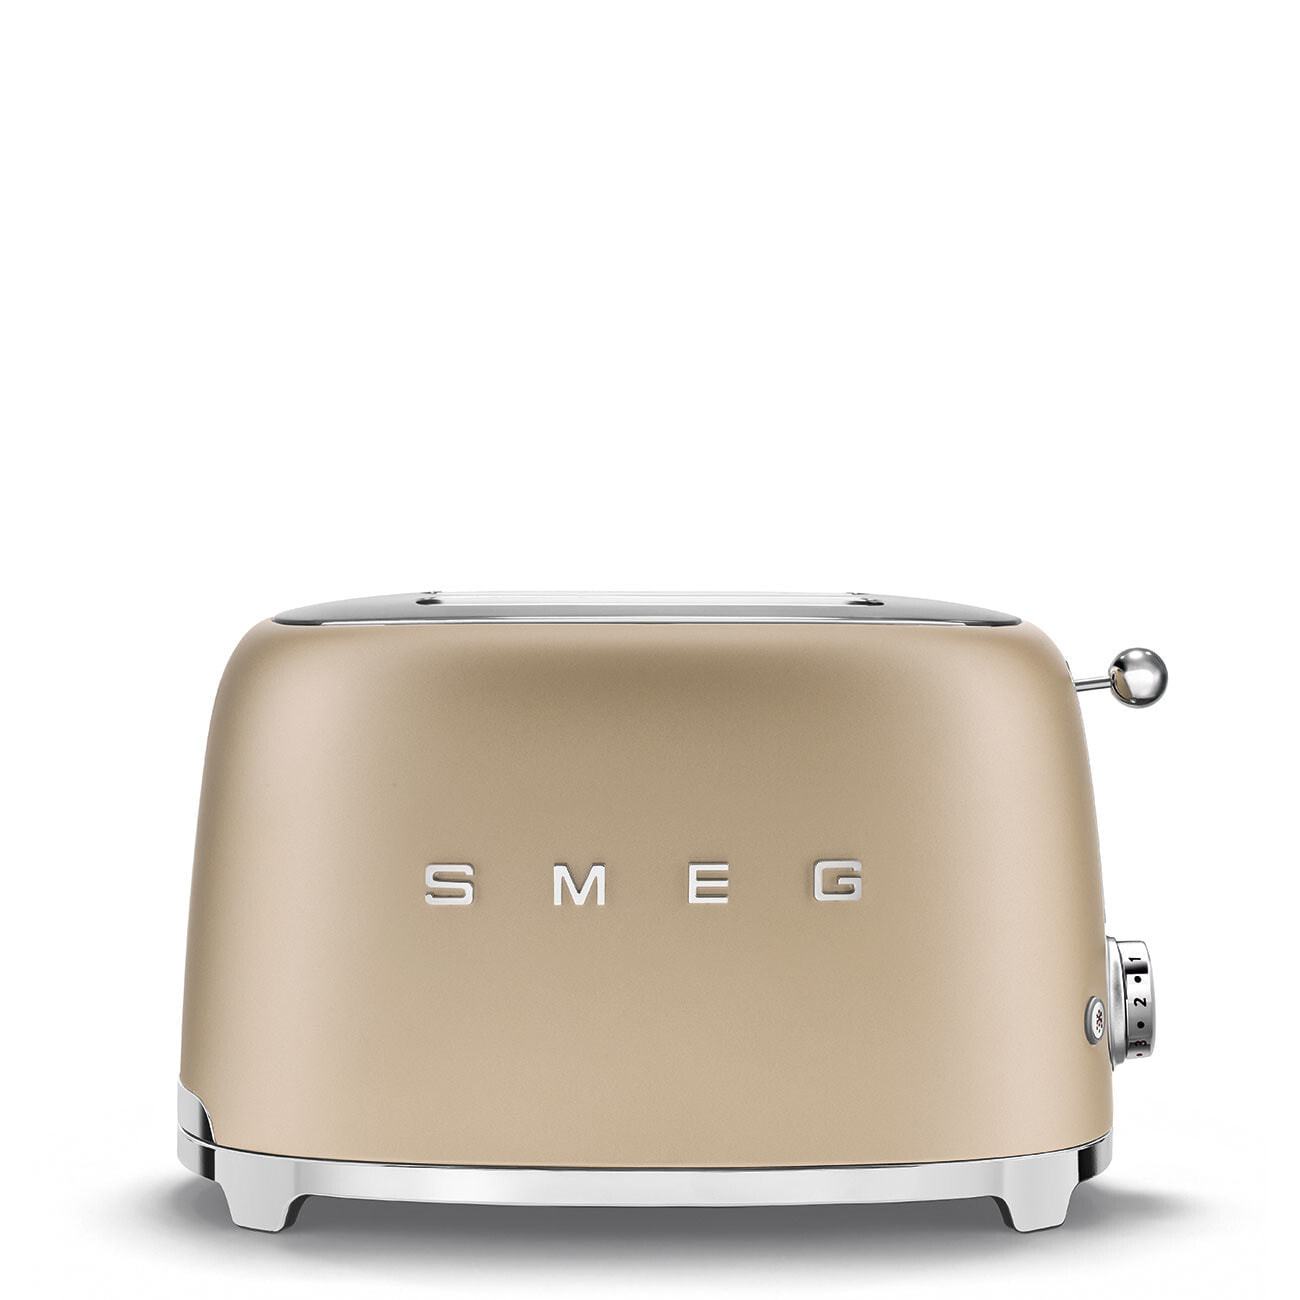 SMEG toaster TSF01CHMEU (Champagne) - 2 slice(s) - Gold - Plastic - Stainless steel - Buttons - Level - Rotary - China - 950 W